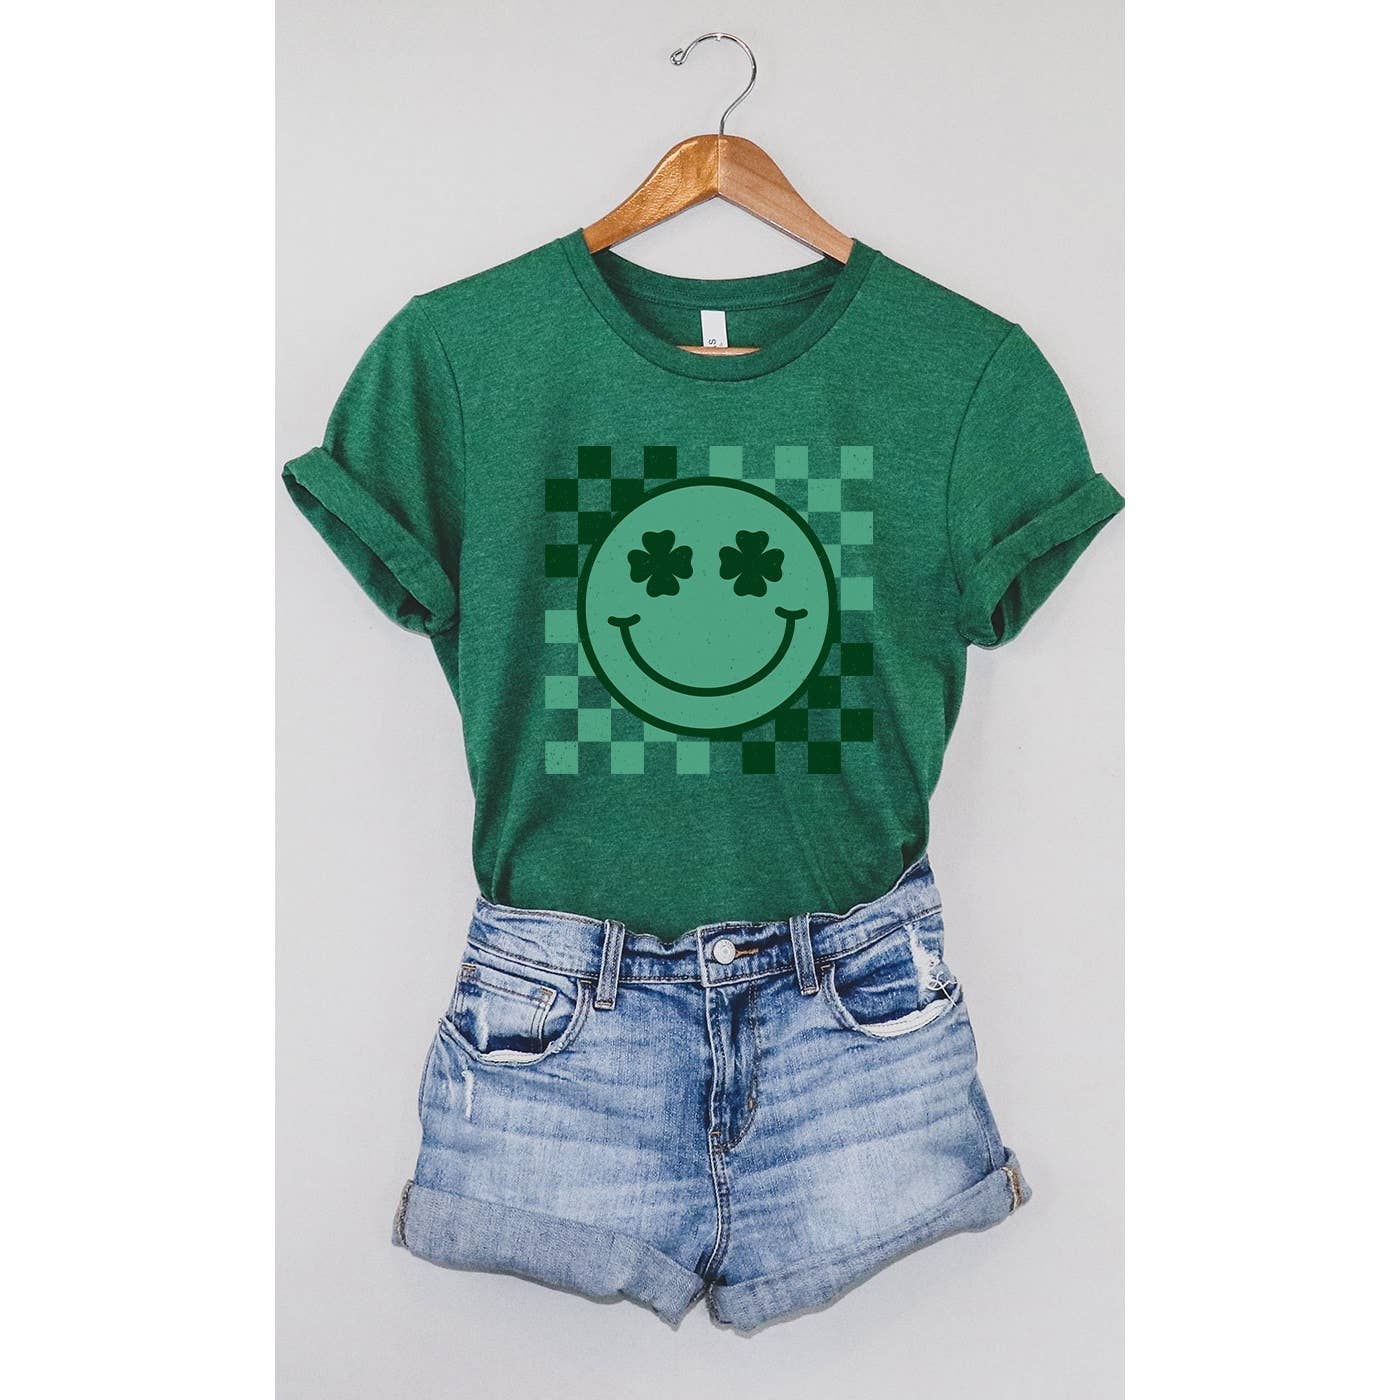 Checkered Clover Smiley St Patrick's Tee